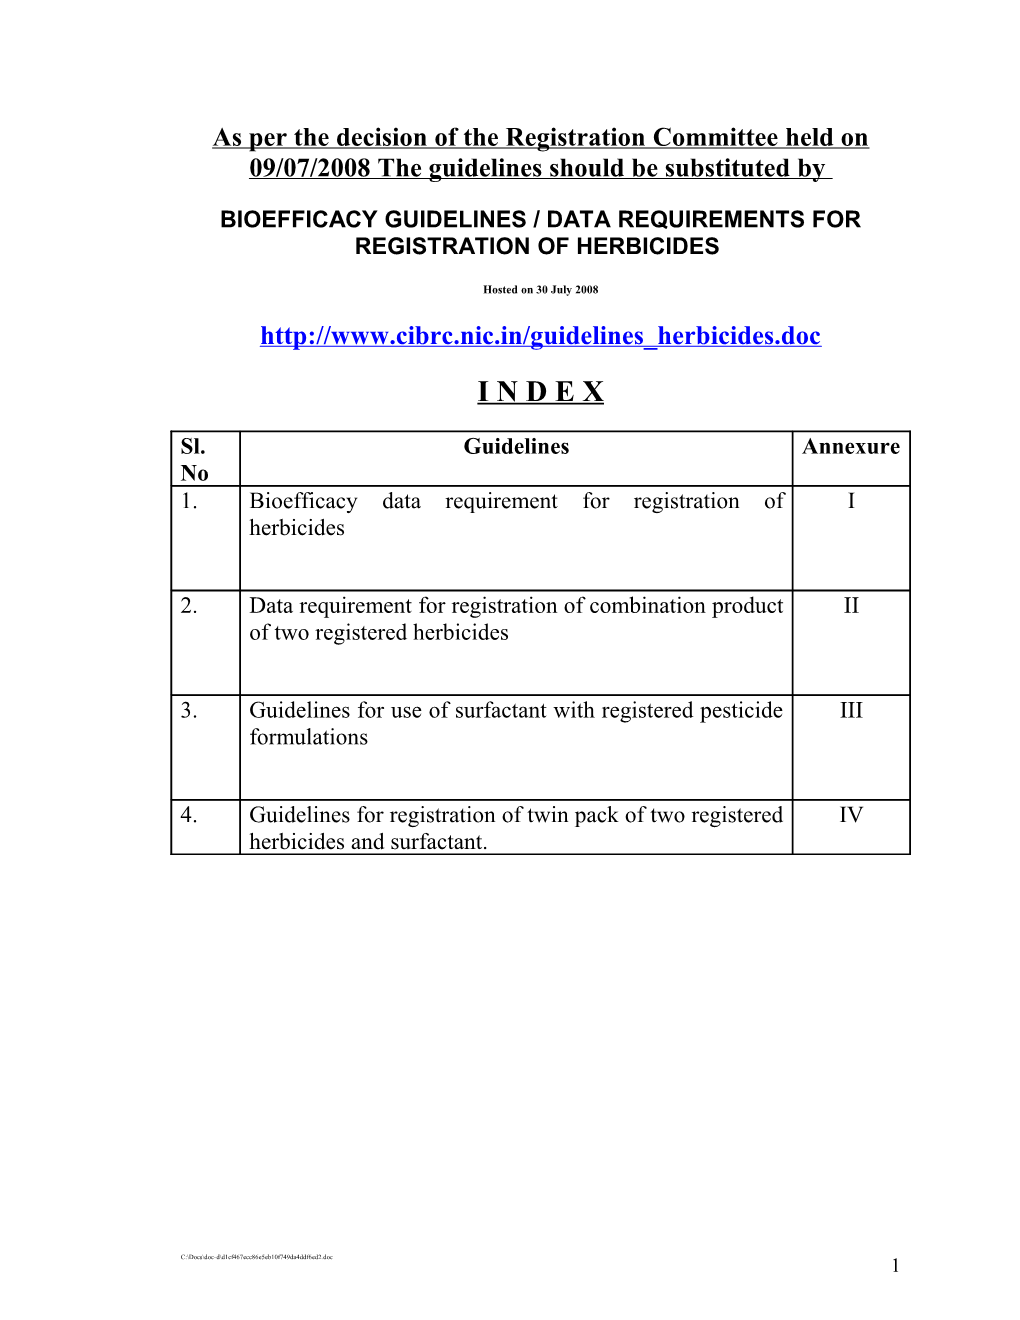 Bioefficacy Guidelines / Data Requirements for Registration of Herbicides